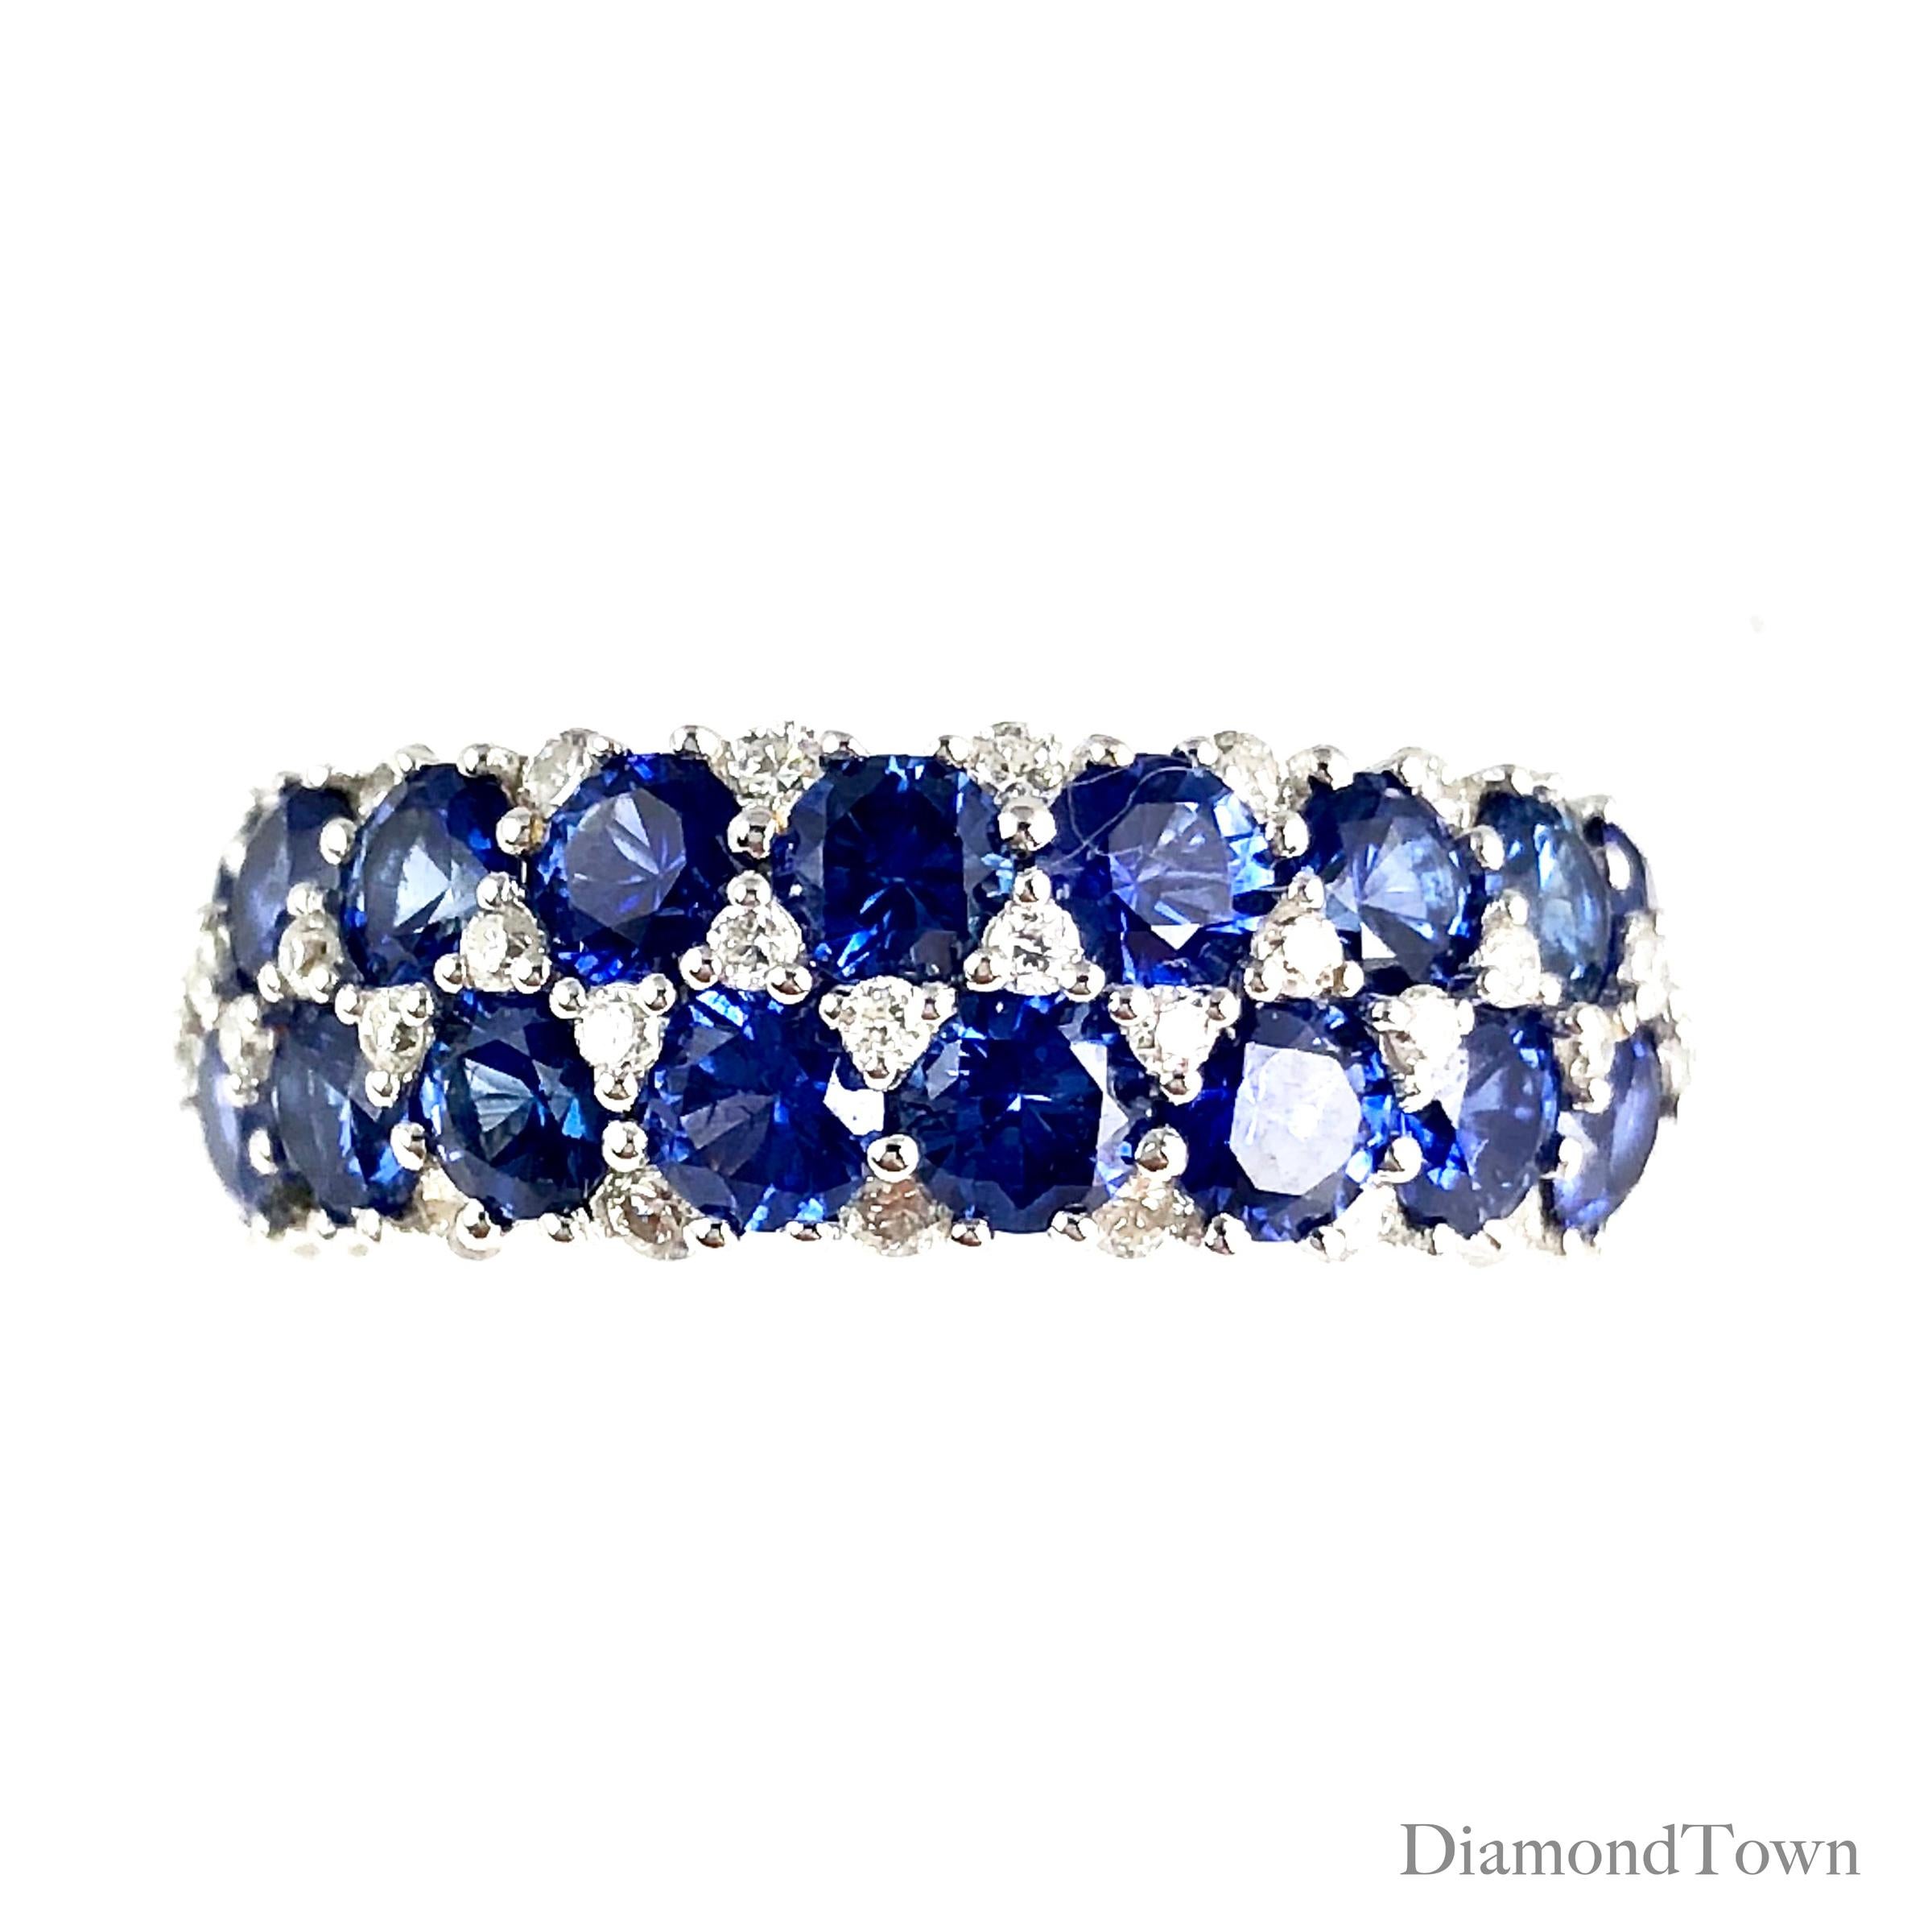 (DiamondTown) This gorgeous handcrafted ring features 17 round vivid blue sapphires tucked among 0.44 carats white diamonds. The layered design extends across the full width of the band.

This ring can be professionally sized to your specification,